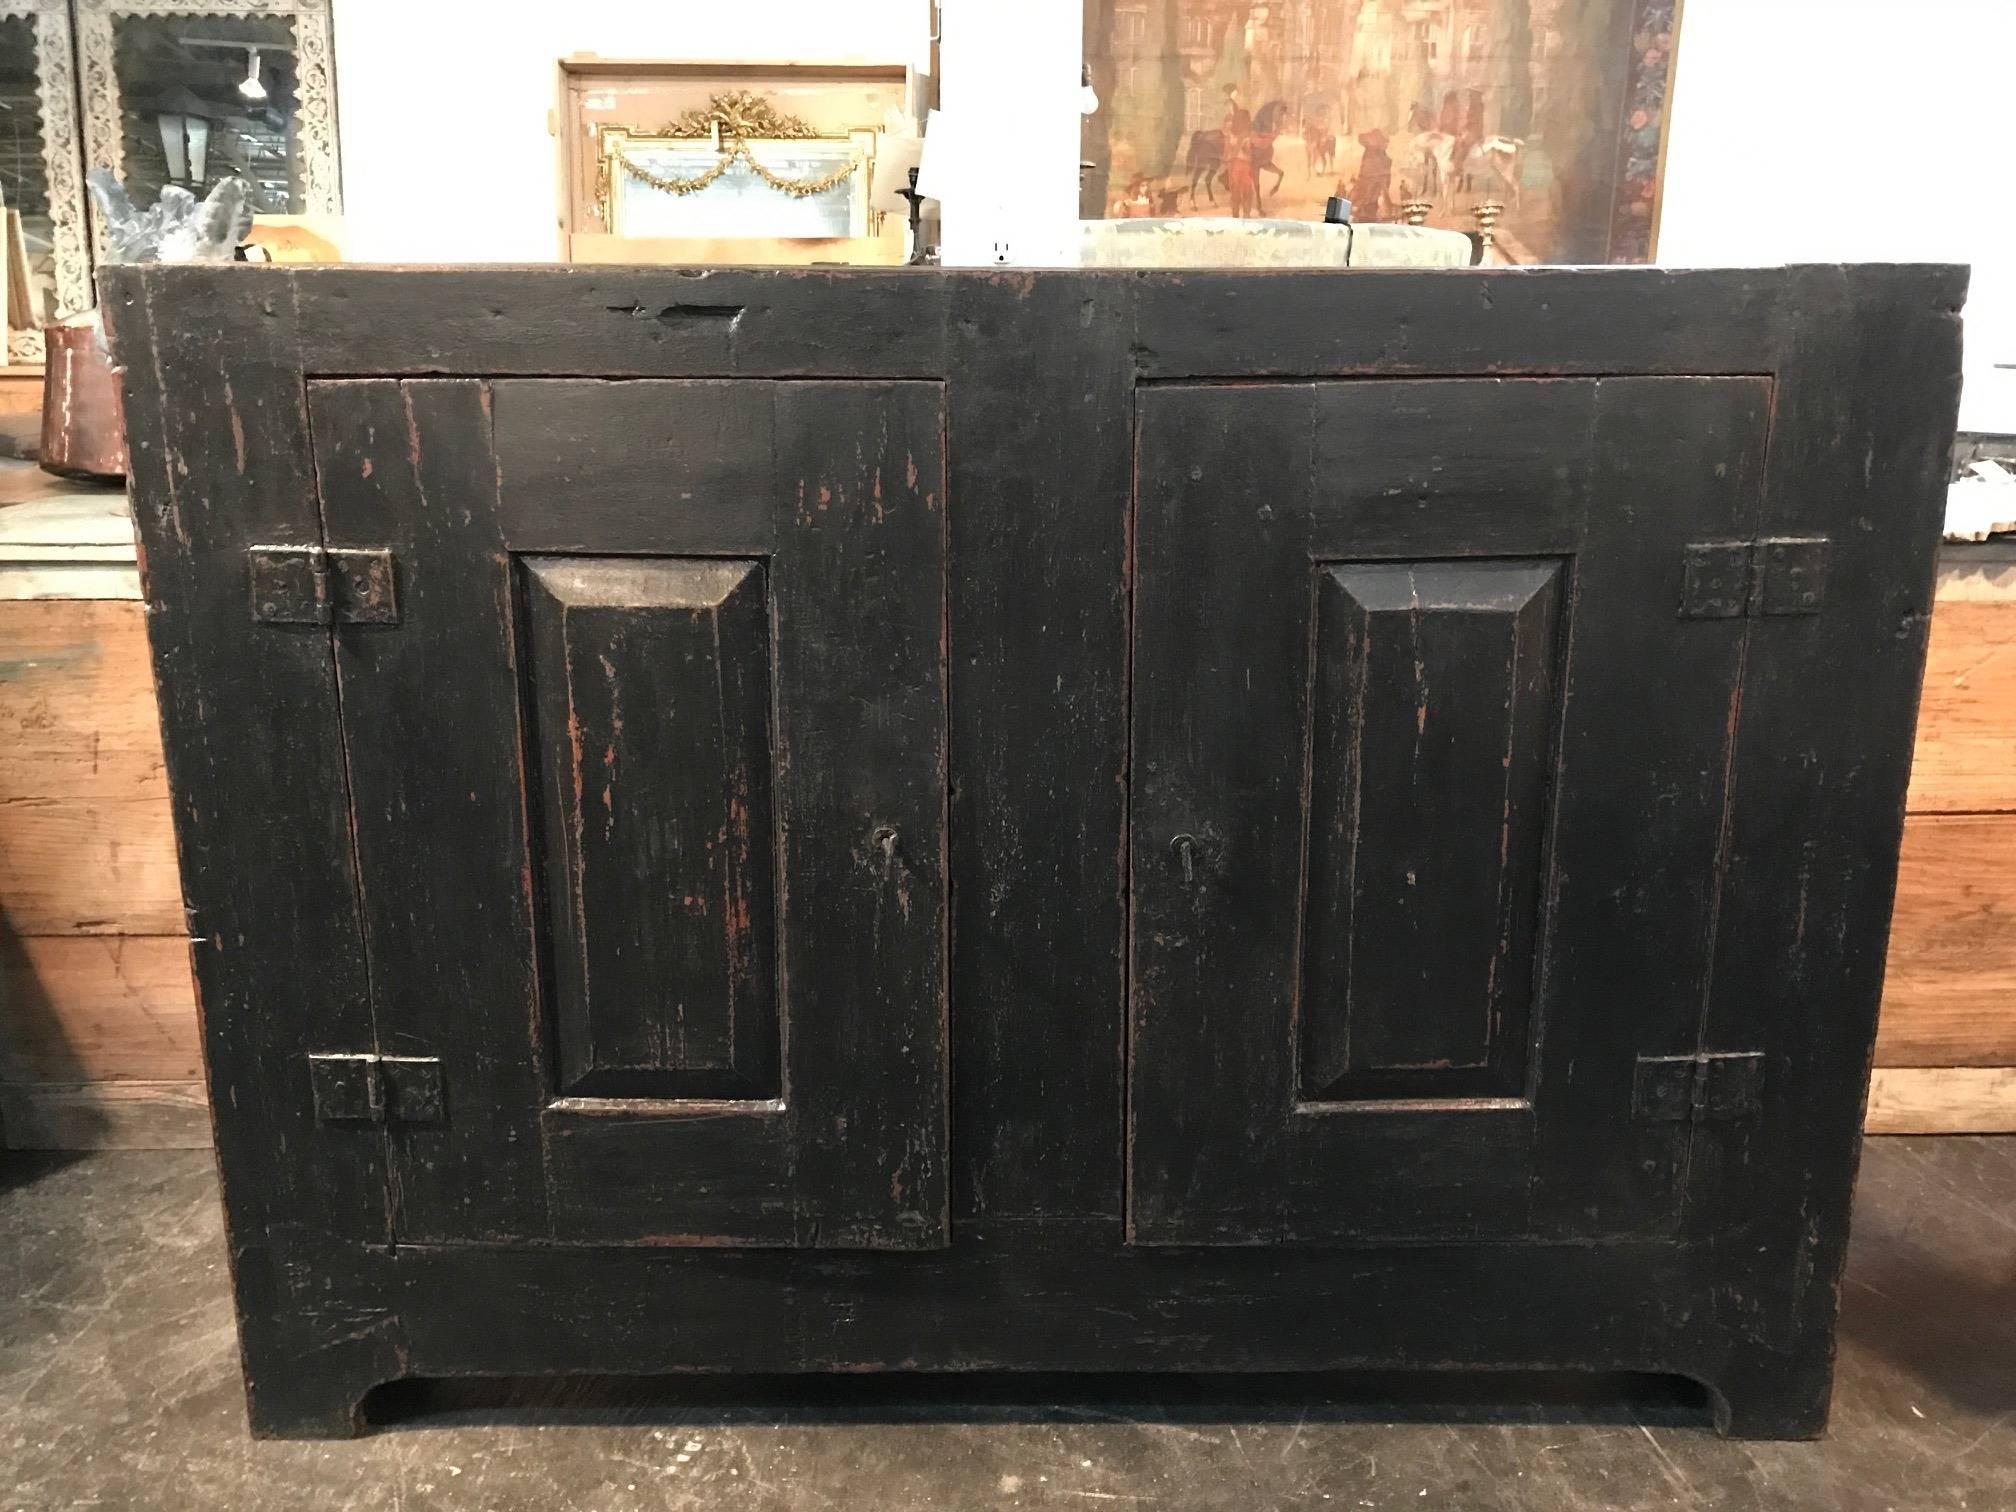 A sensational Primitive 17th century buffet from the Catalan region of Spain. Wonderfully constructed with very thick planks. Terrific patina and finish.